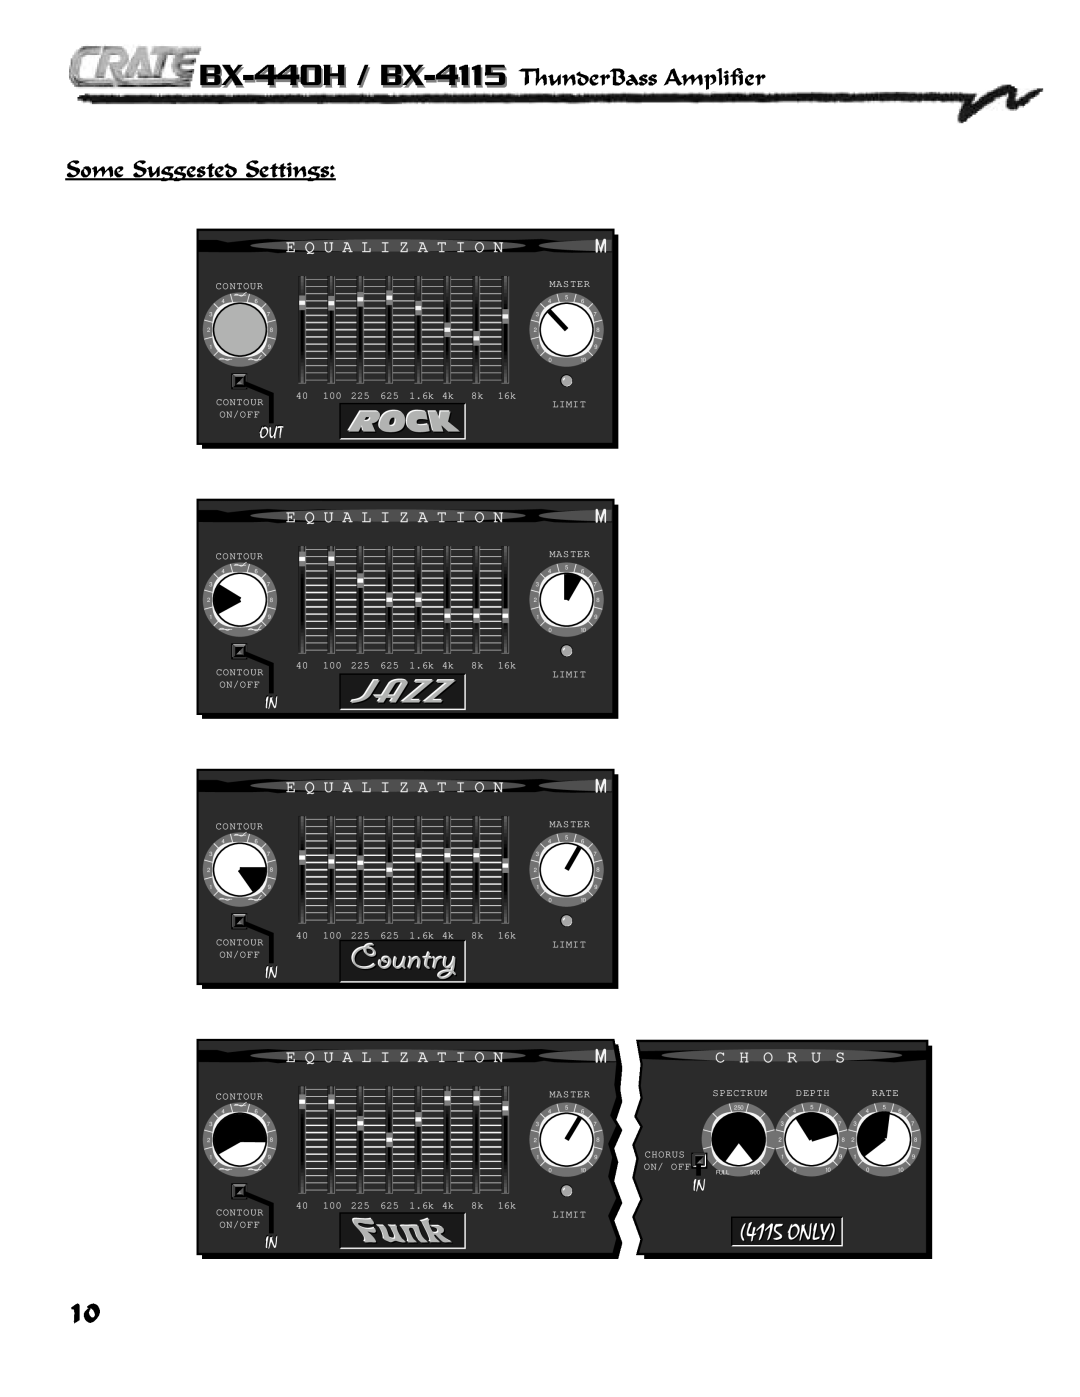 Crate Amplifiers BX-440H / BX-4115 ThunderBass Amplifier Some Suggested Settings, Only, E Q U A L I Z A T I O N 